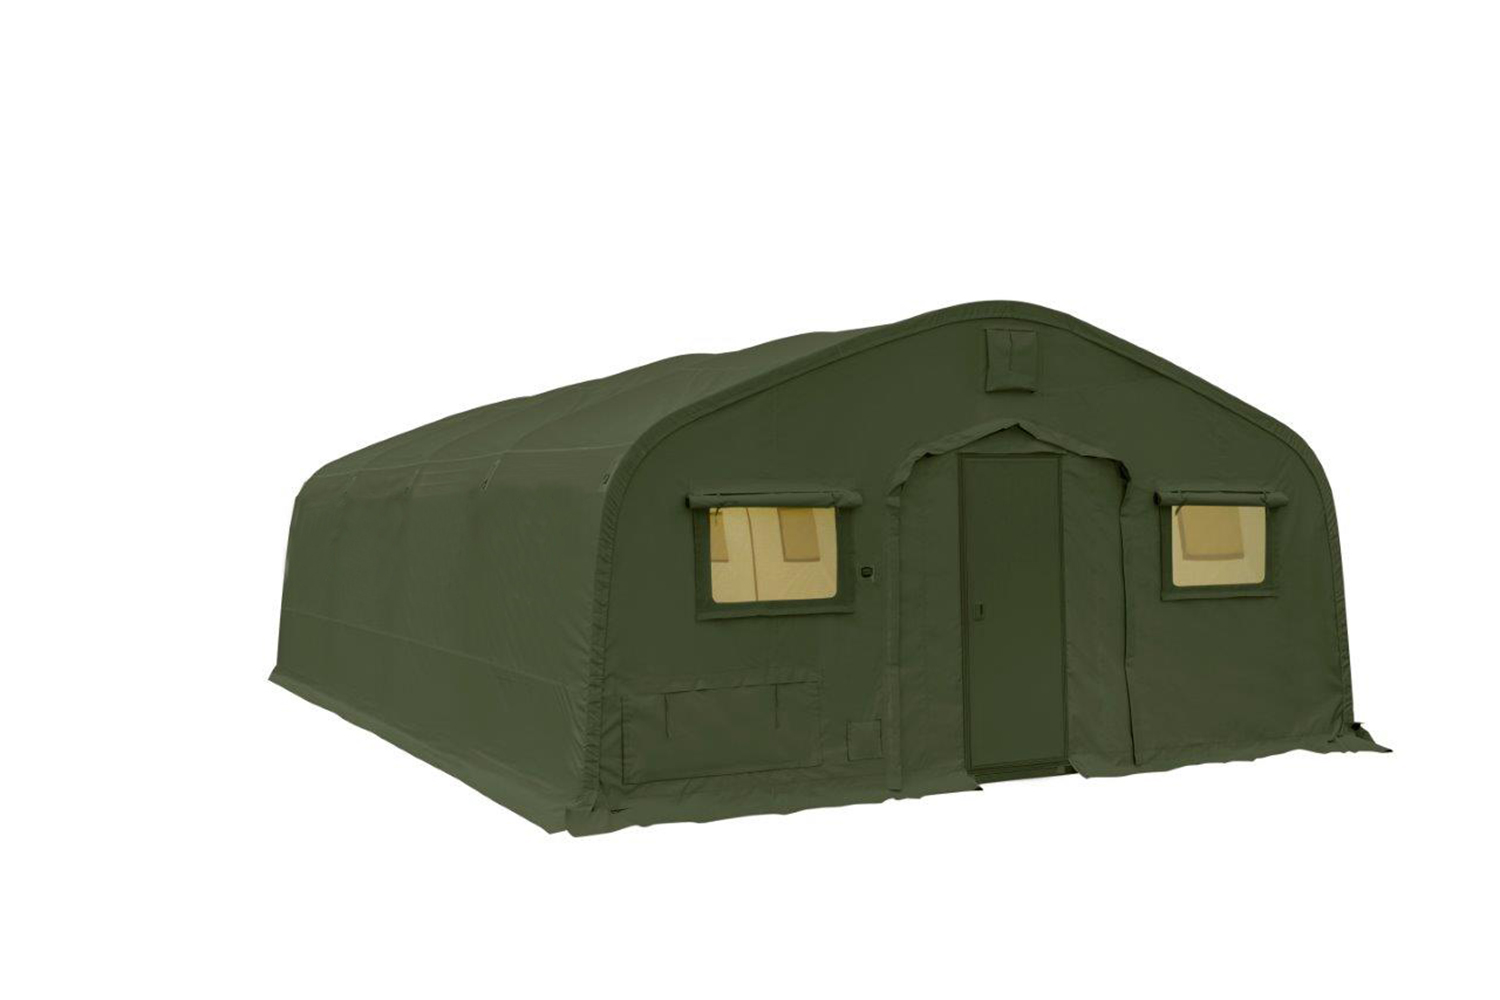 CAMSS: Green CAMSS 20EX Lavatory Military Shelter